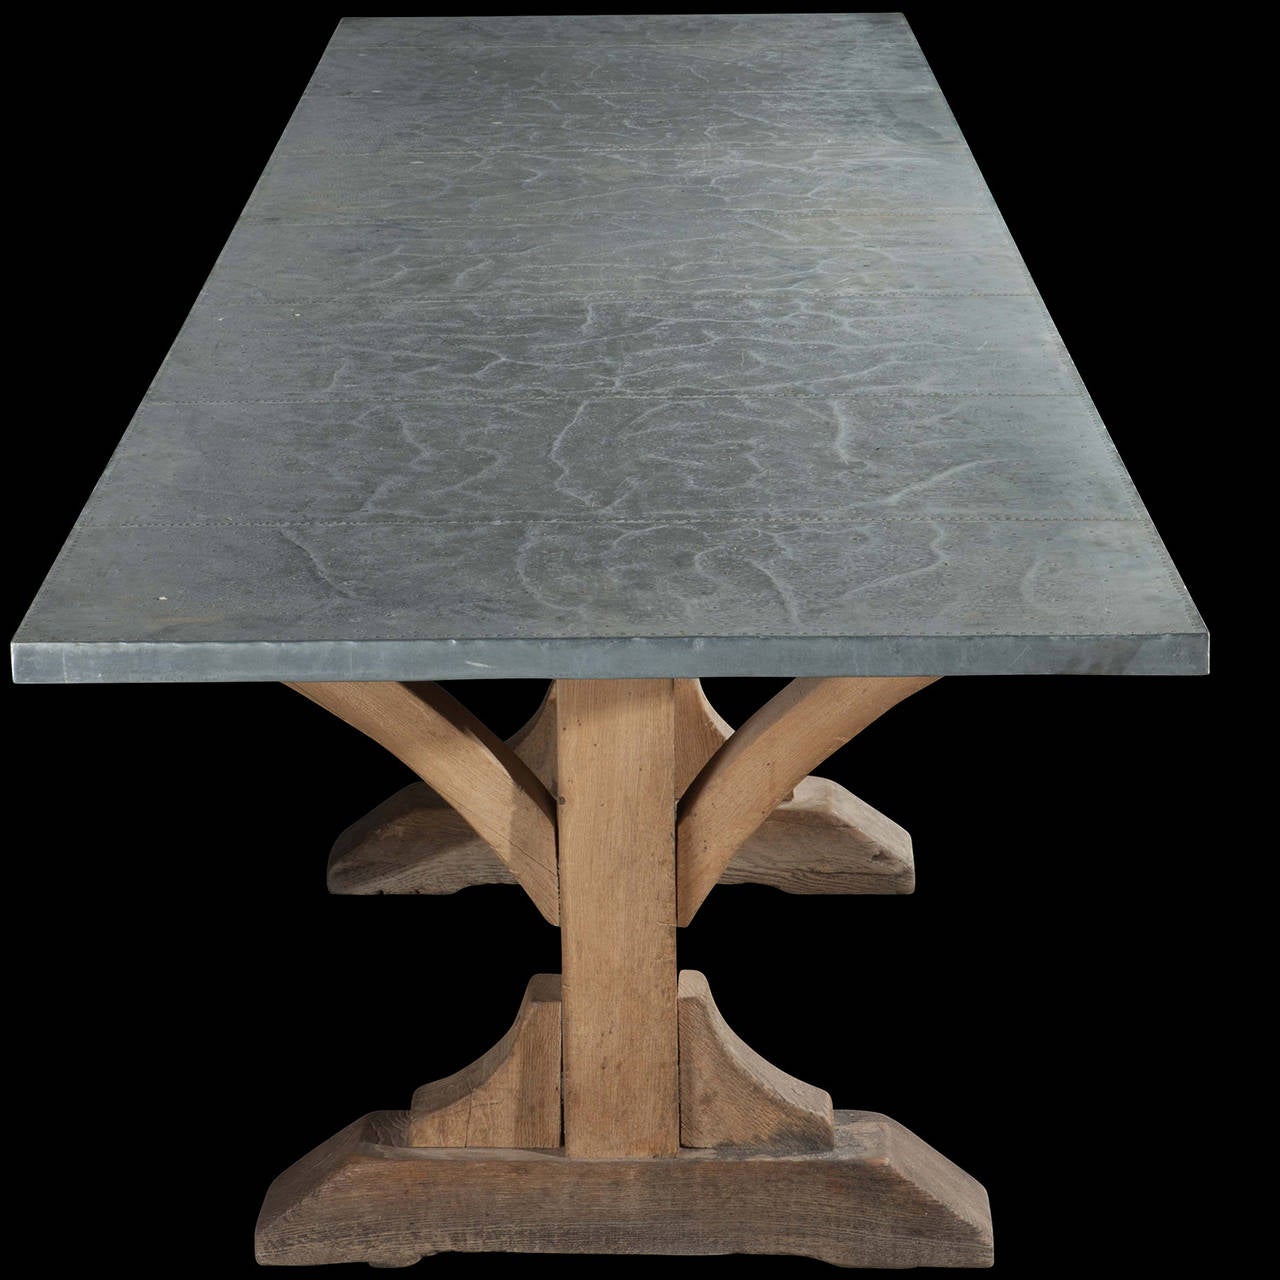 Hand-Crafted Large Oak Refectory Table with Zinc Top